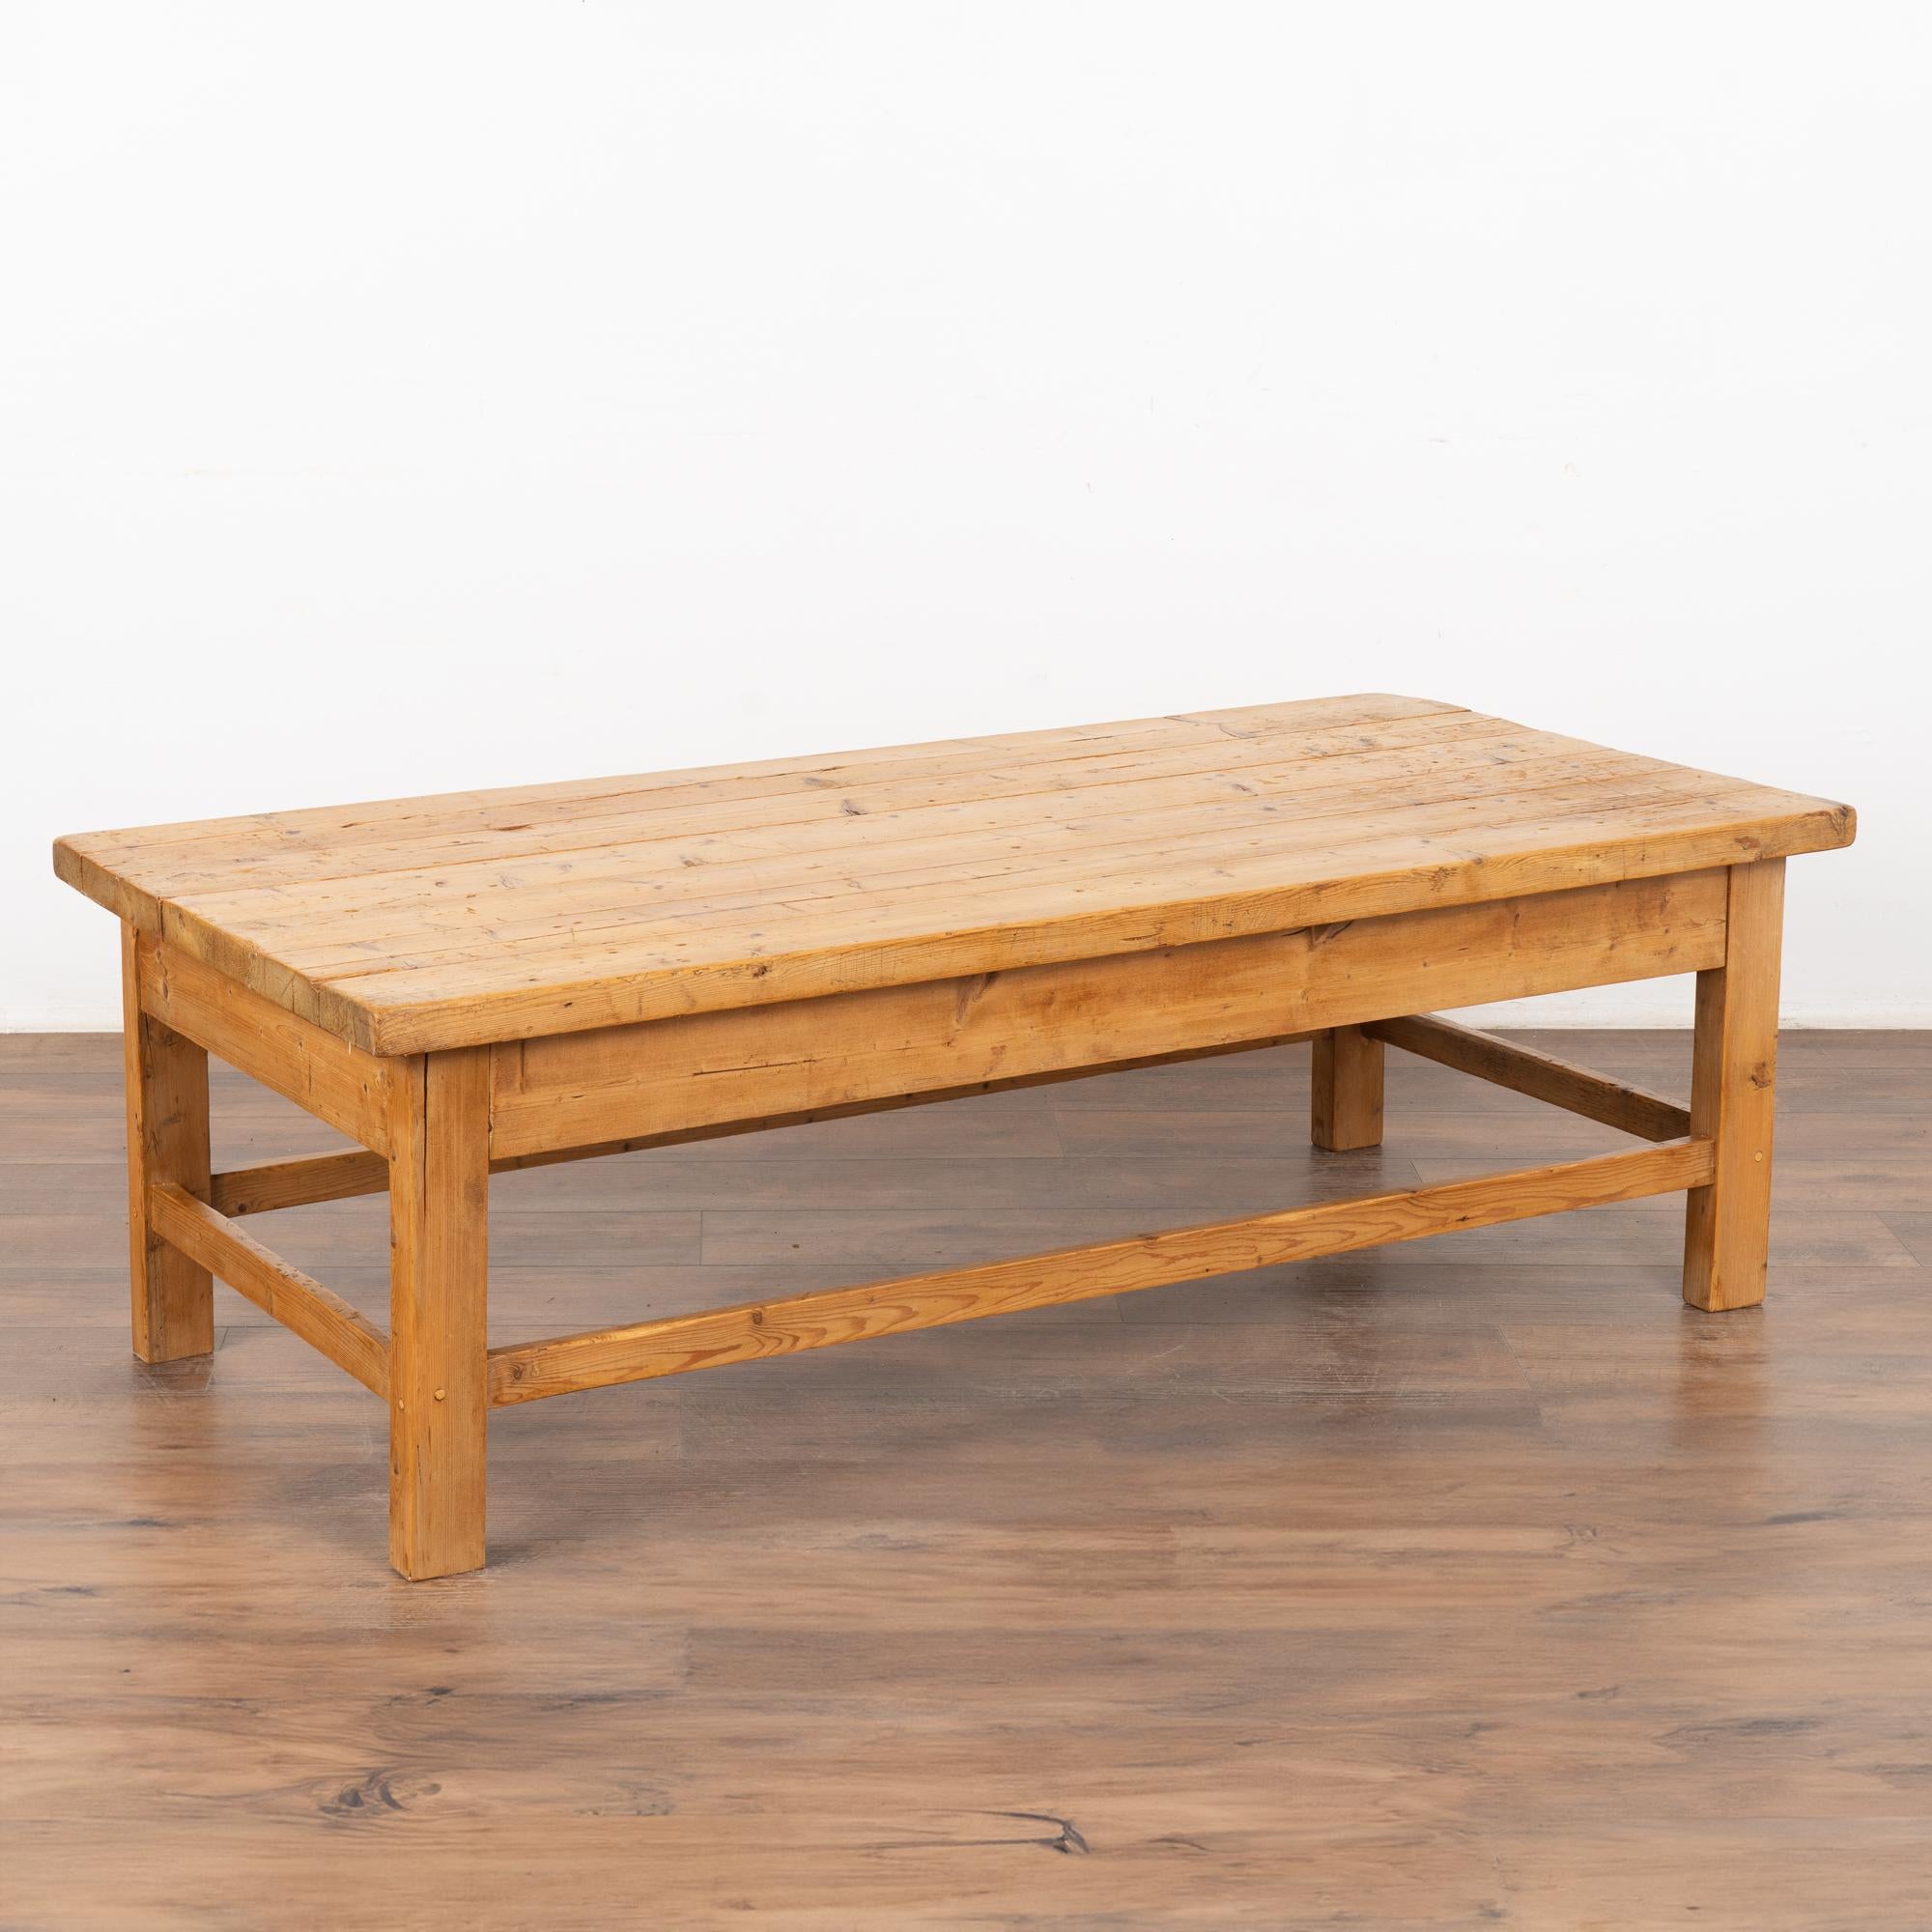 Rustic farmhouse style coffee table loaded with vintage character.
The plank wood top is covered in scrapes, gouges, stains and old cracks acquired with 100 years of use as a work table. 
Restored and waxed, this coffee table is strong, sturdy and